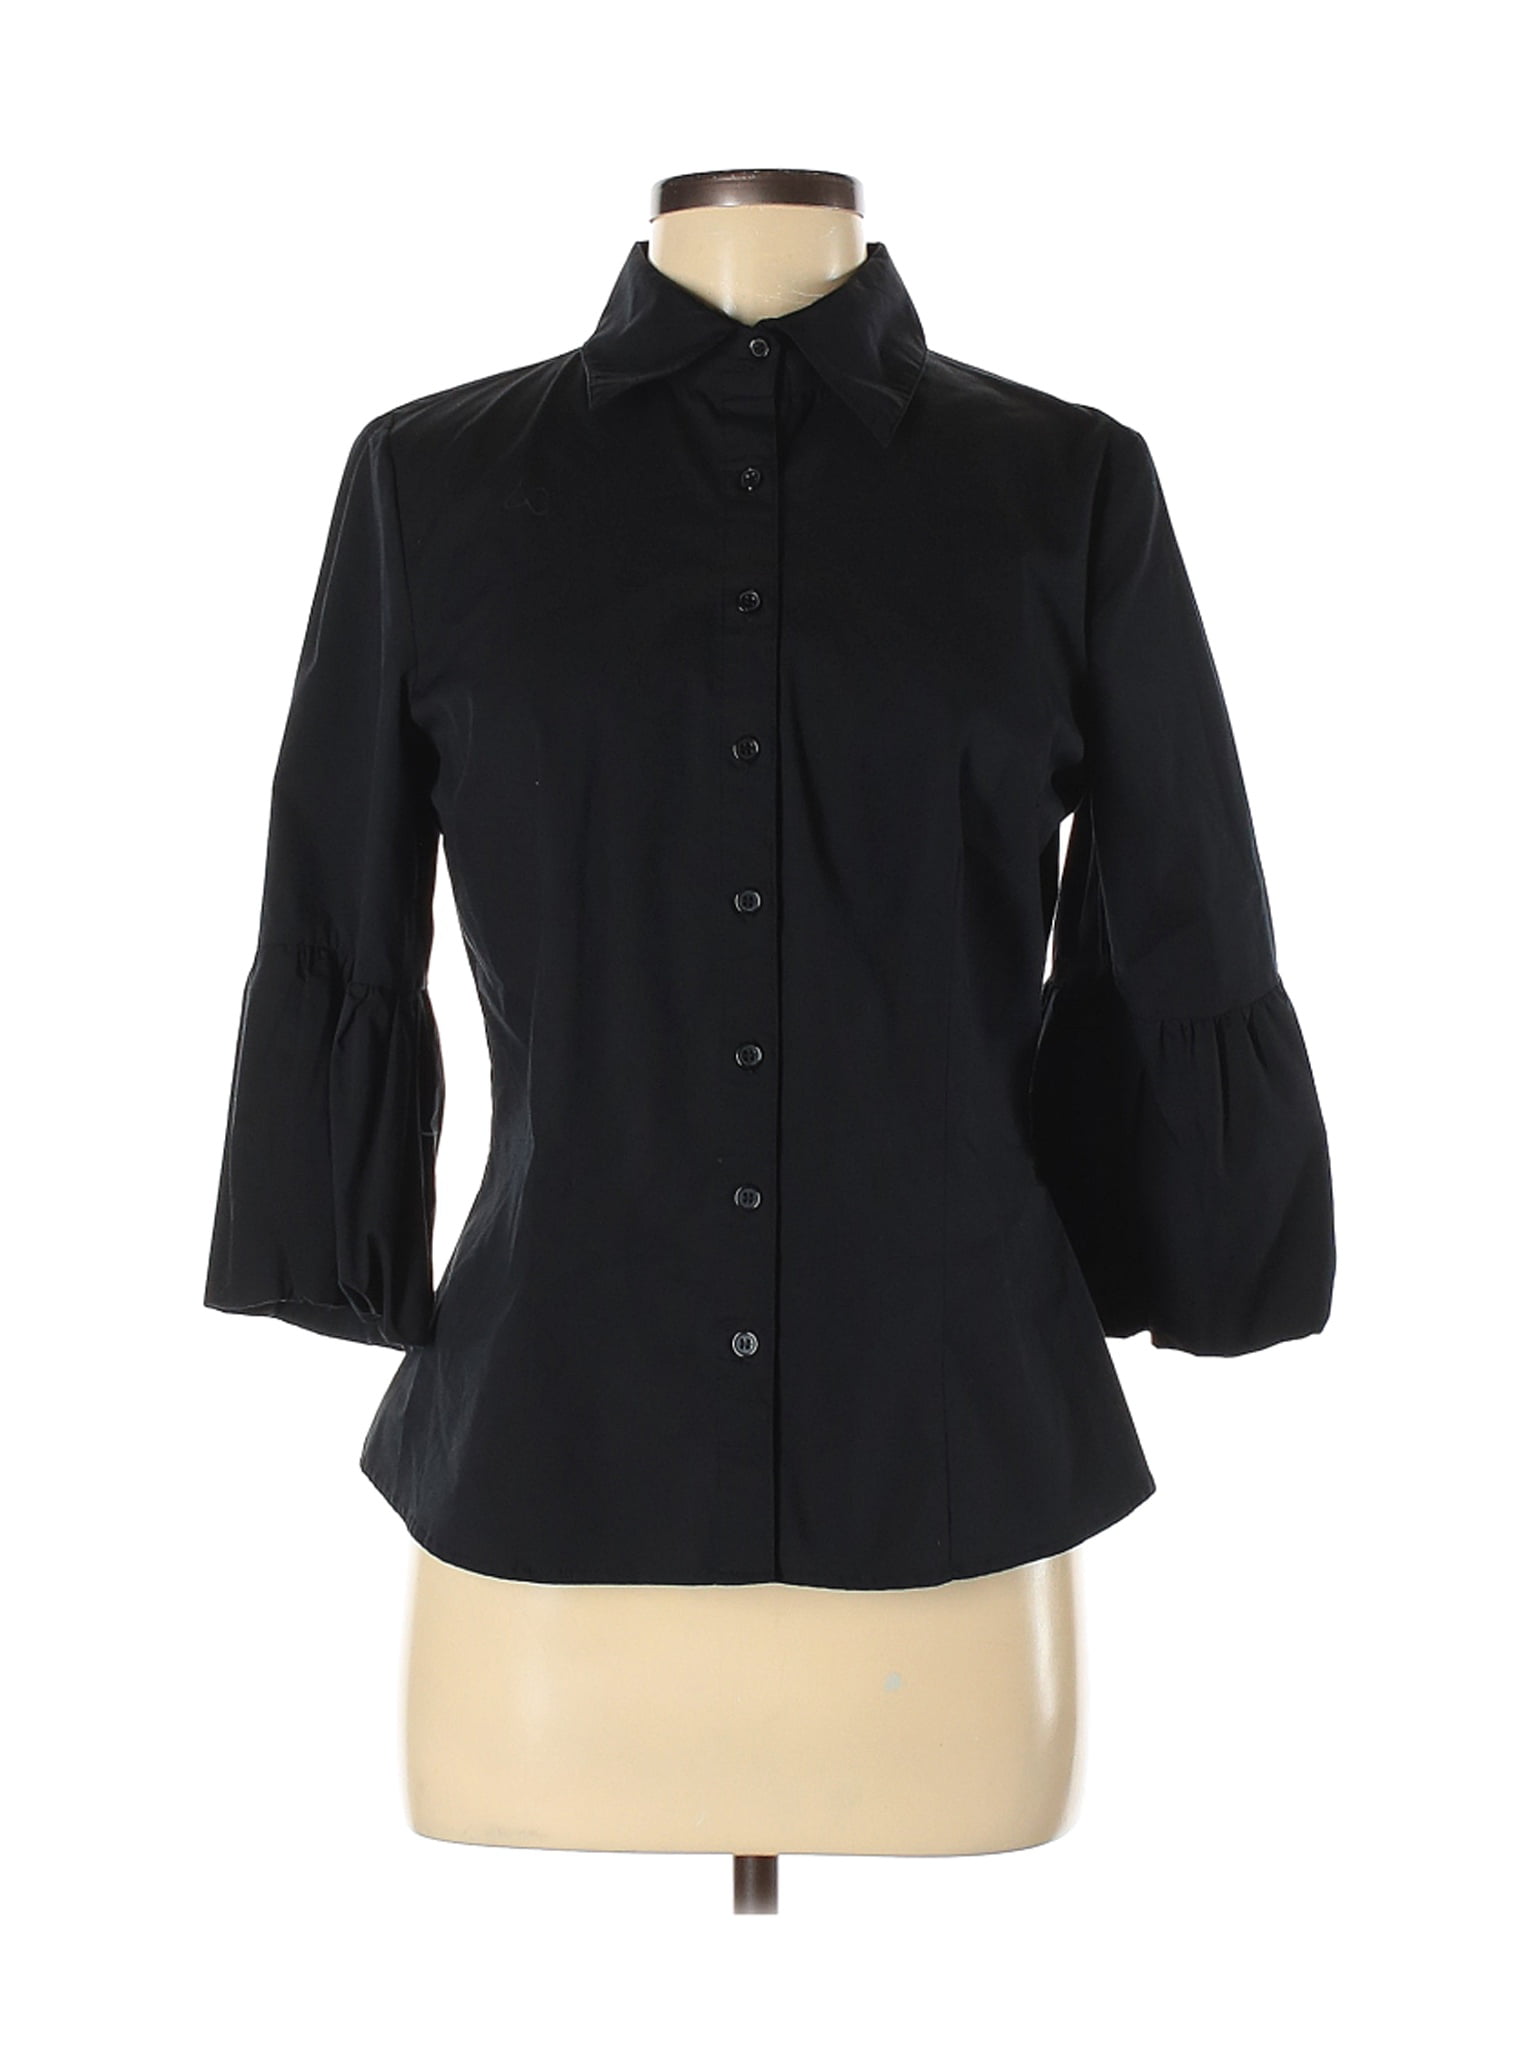 Apt. 9 - Pre-Owned Apt. 9 Women's Size M 3/4 Sleeve Button-Down Shirt ...